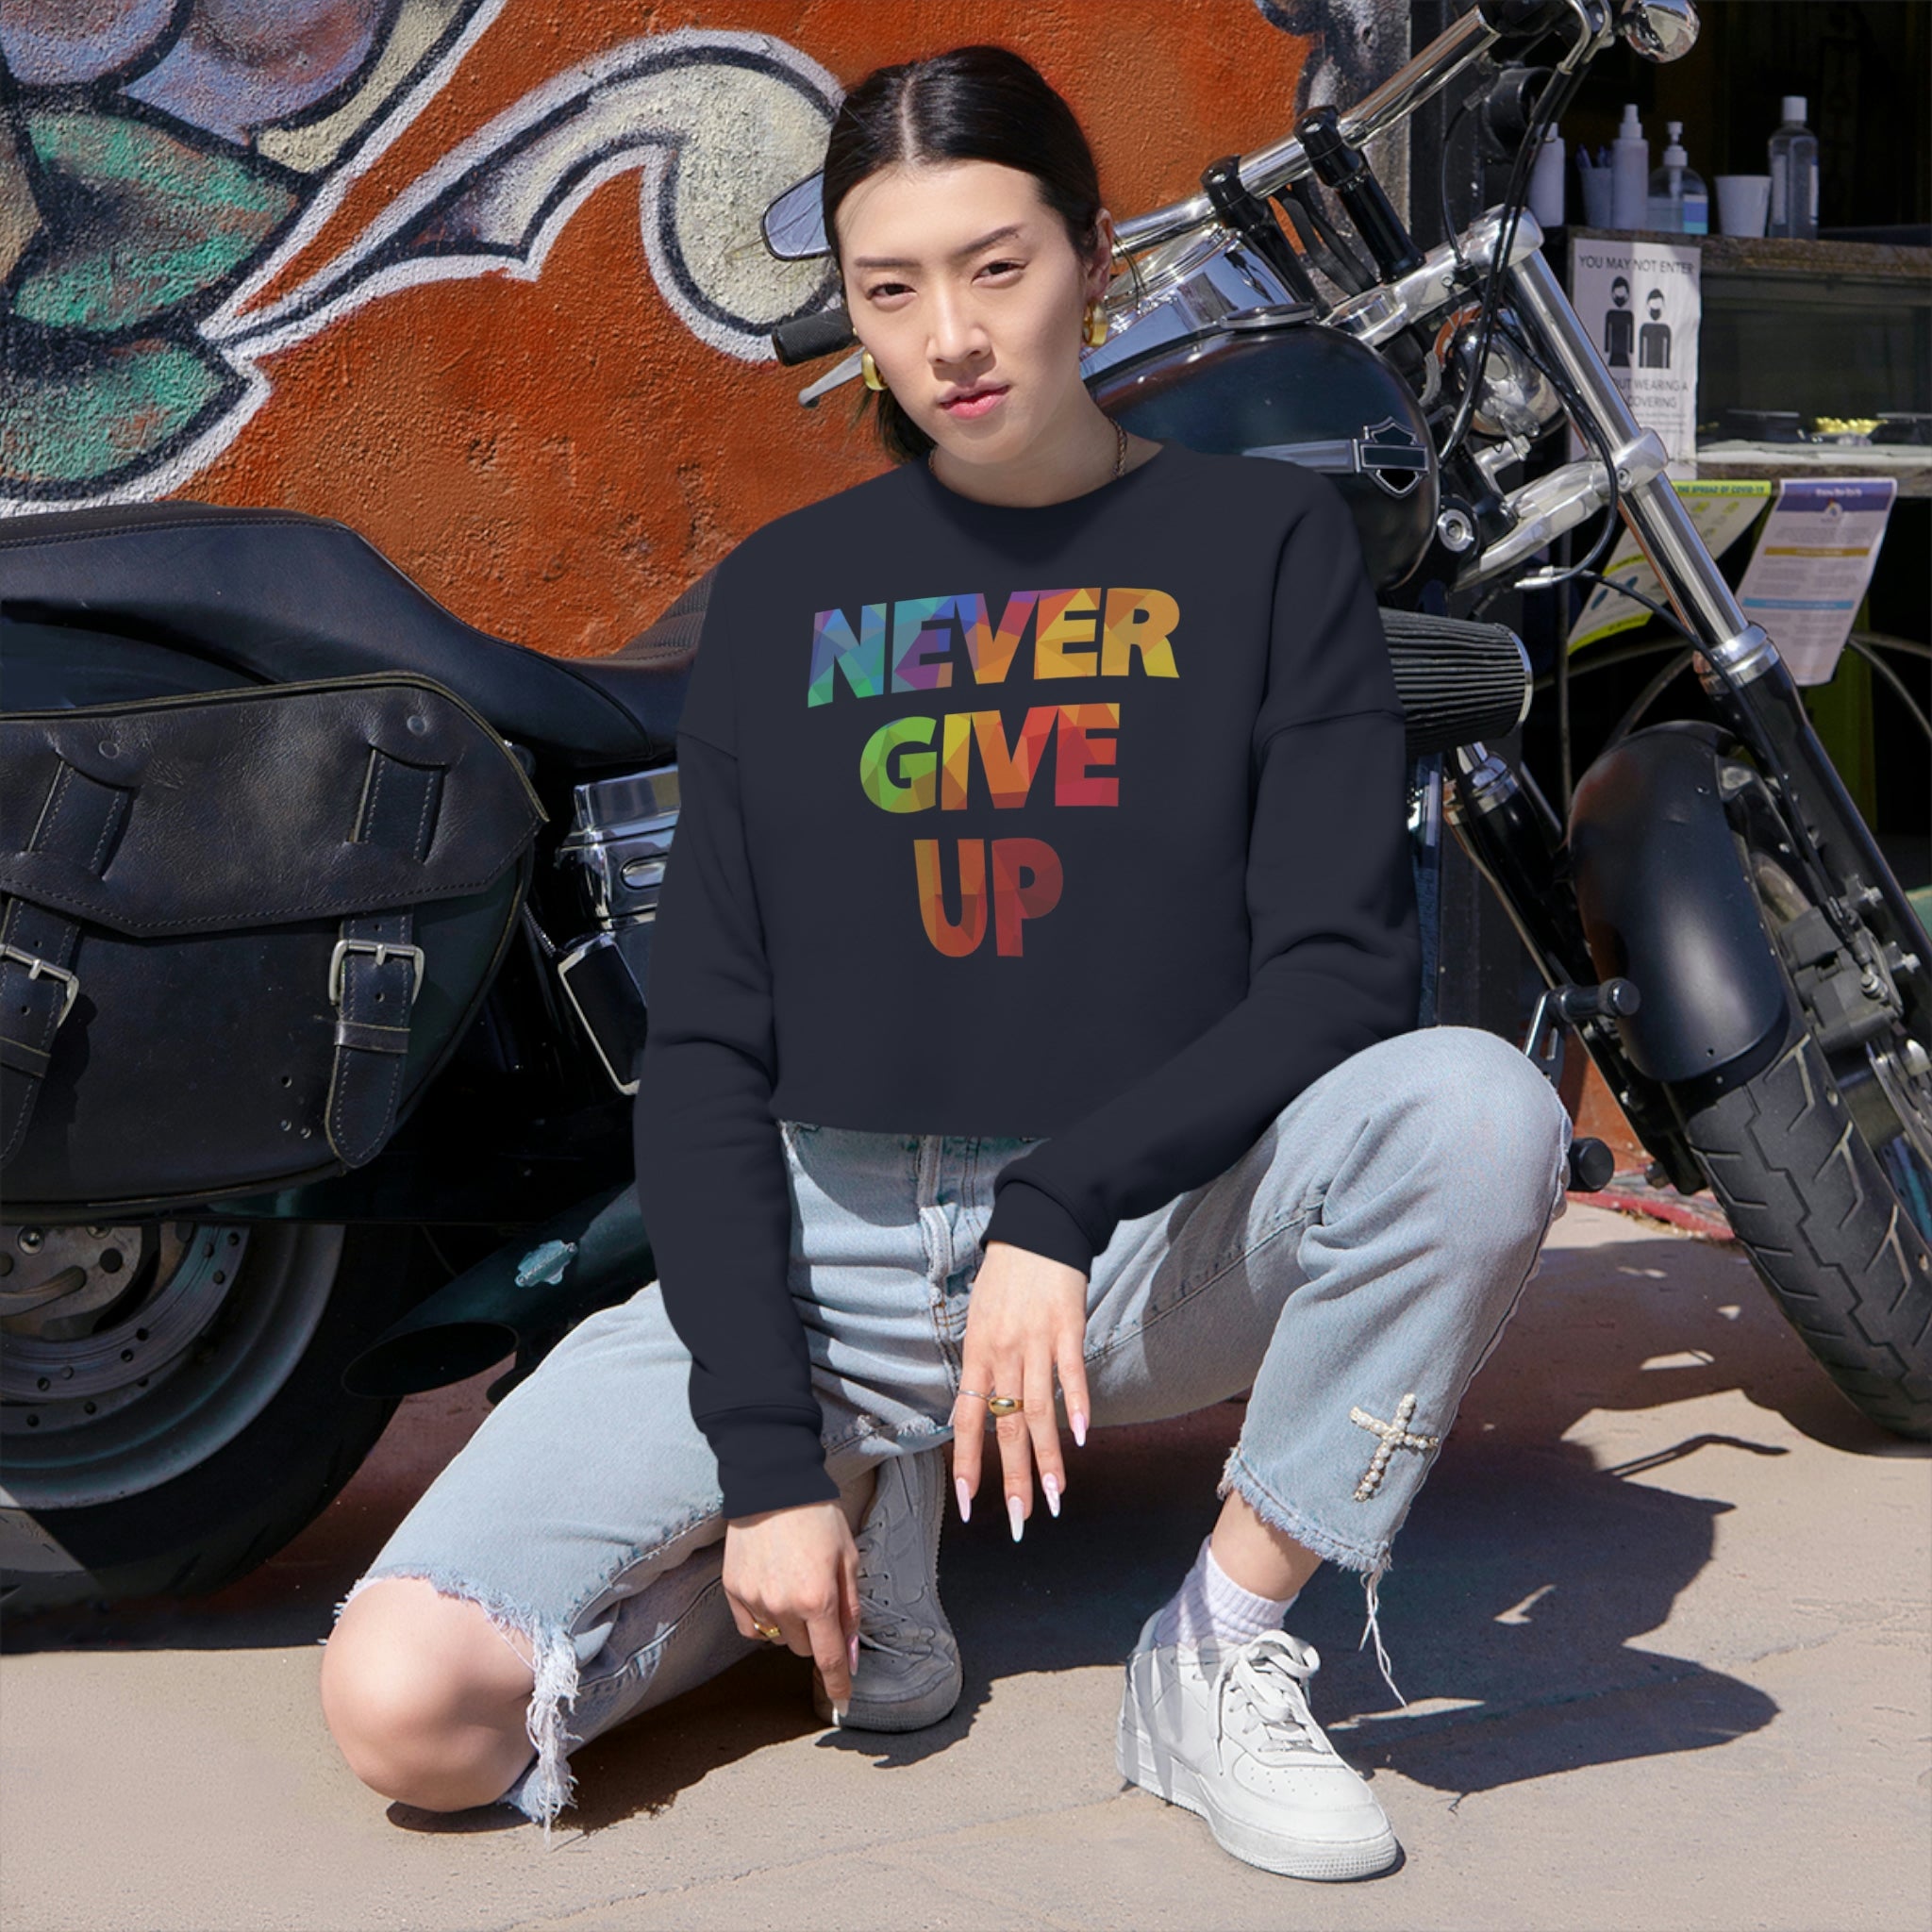 "Never Give Up" Women's Cropped Sweatshirt